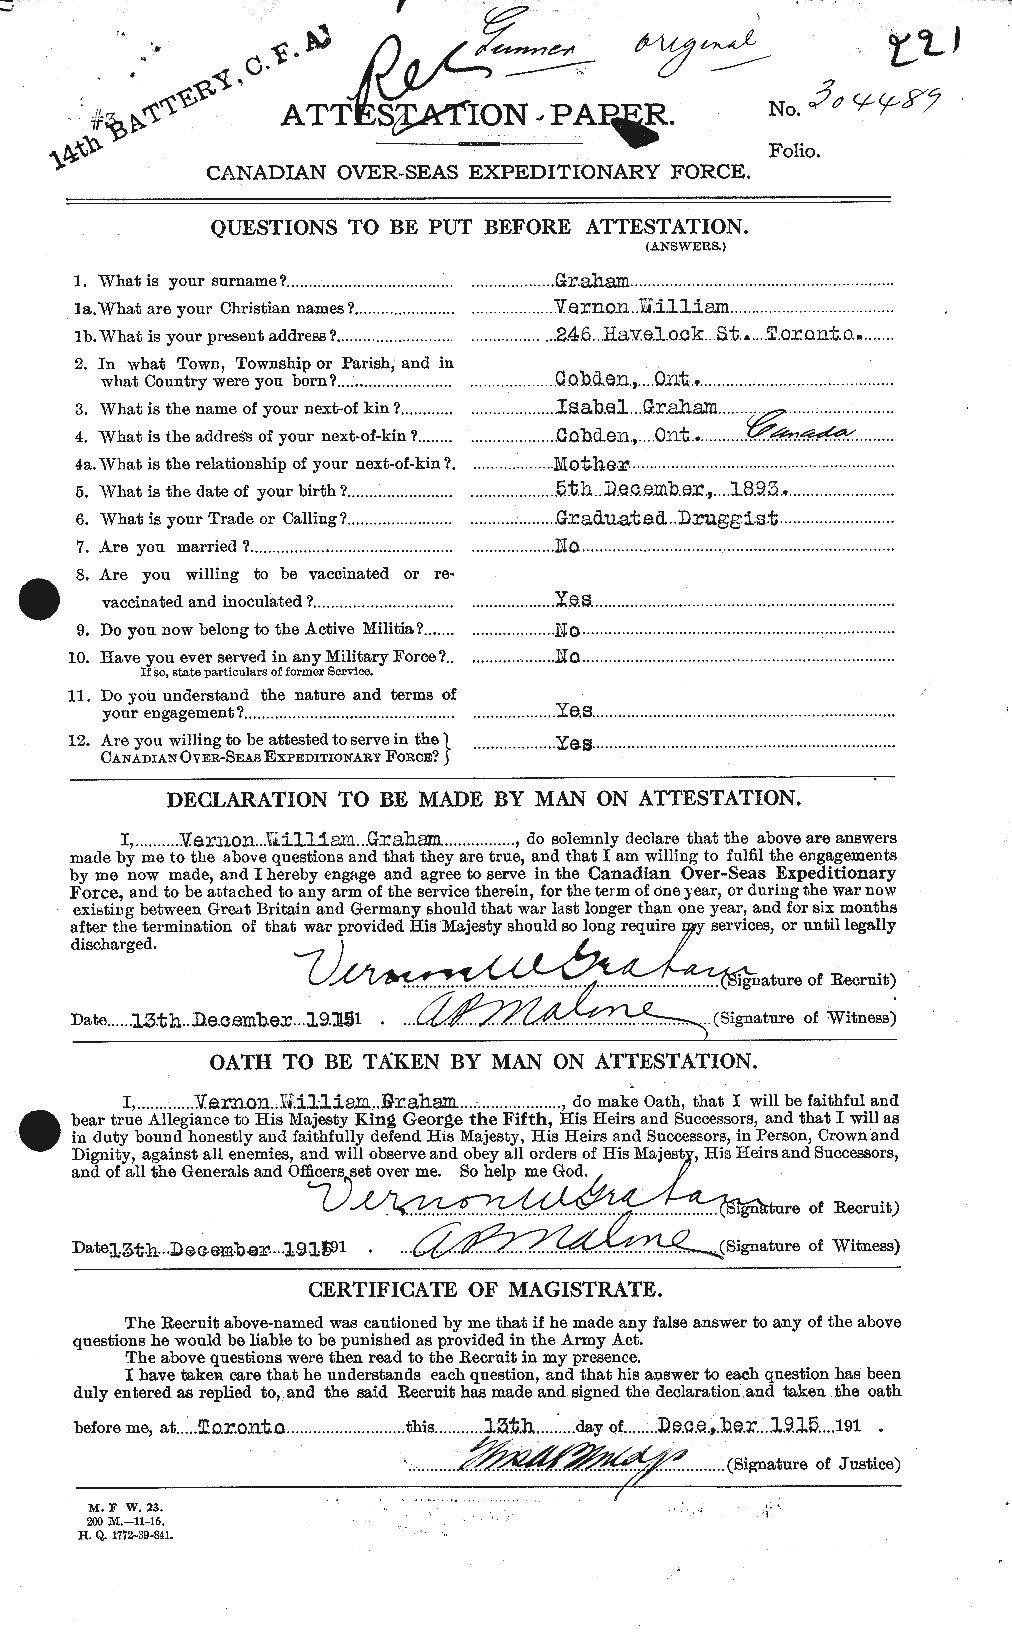 Personnel Records of the First World War - CEF 359536a